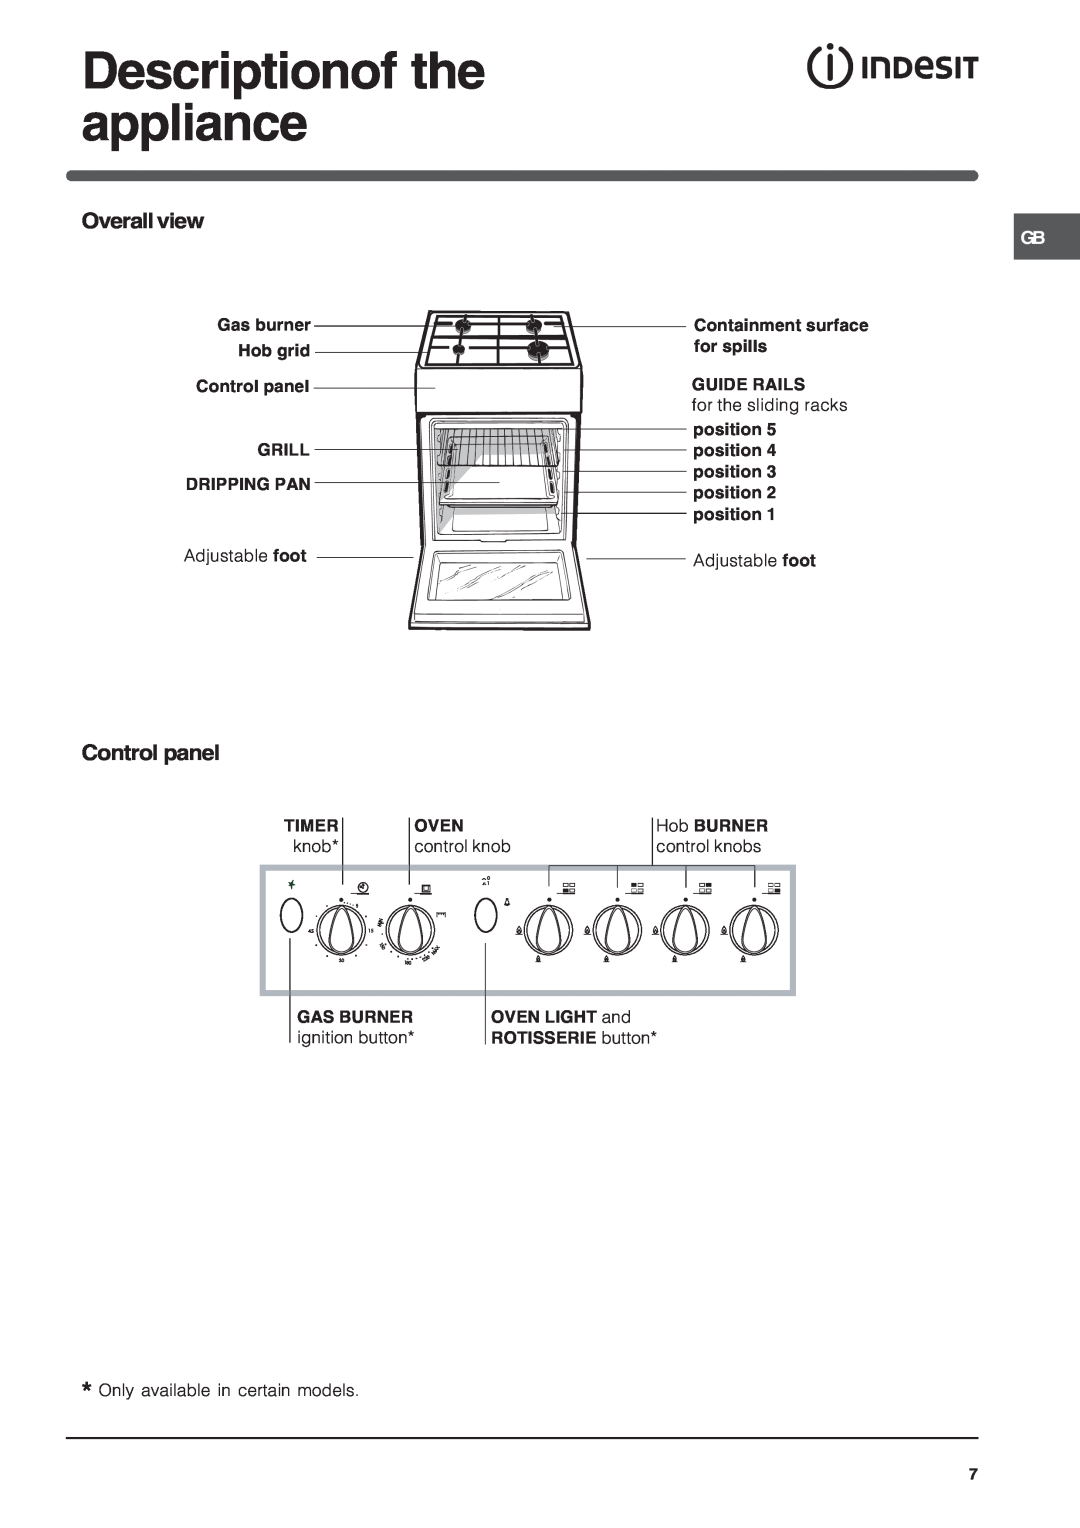 Indesit K3G2S/G Descriptionof the appliance, Overall view, Gas burner Hob grid Control panel GRILL, Dripping Pan 